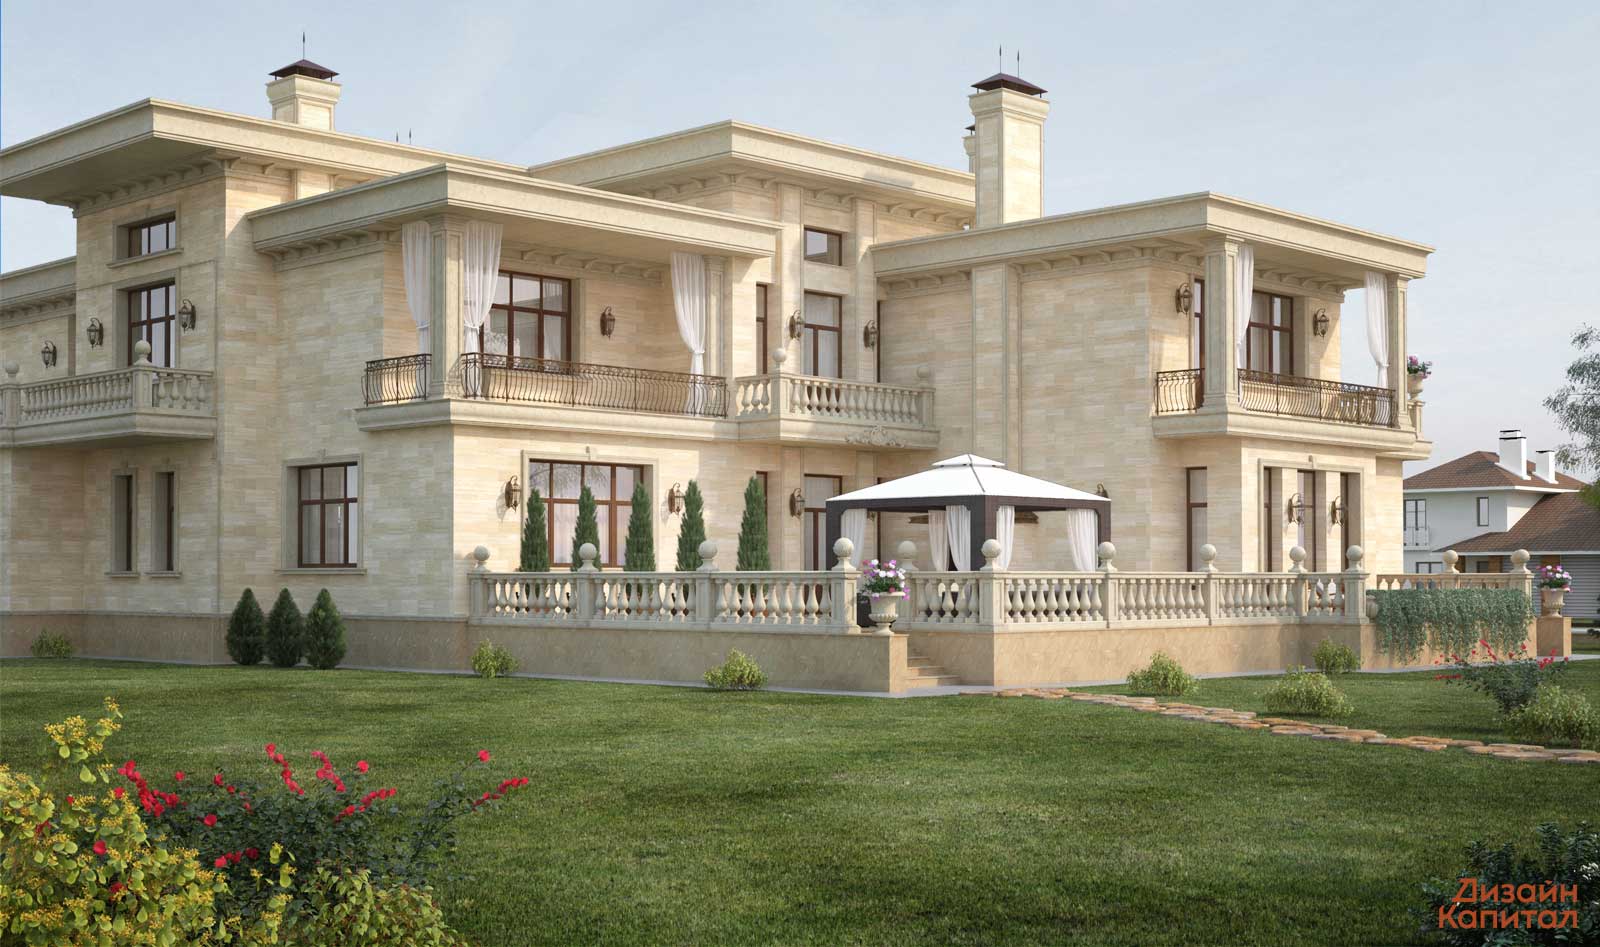 Facade design of a large house with sandstone finish. Modern Classical